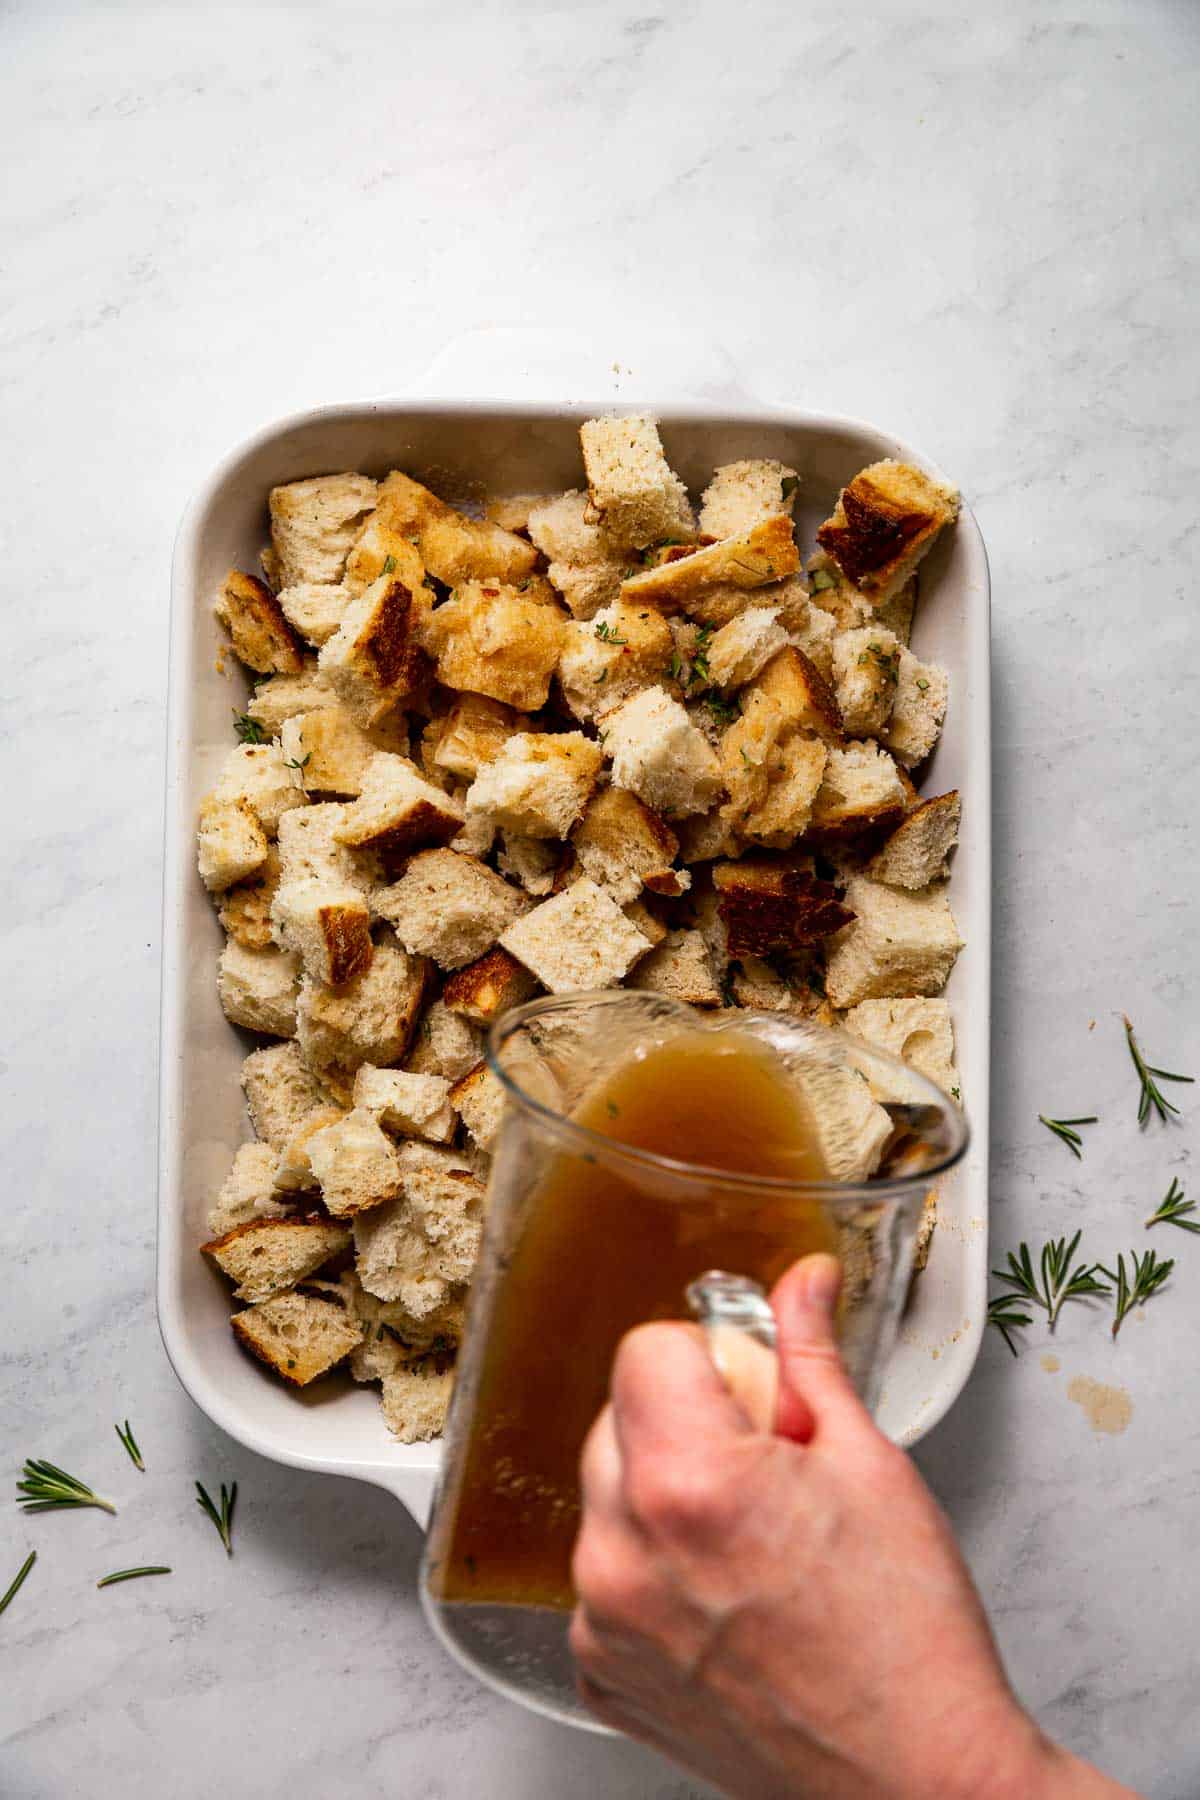 A hand pouring a pitcher of broth over a baking dish filled with large sourdough bread cubes and fresh herbs, making simple sourdough stuffing.